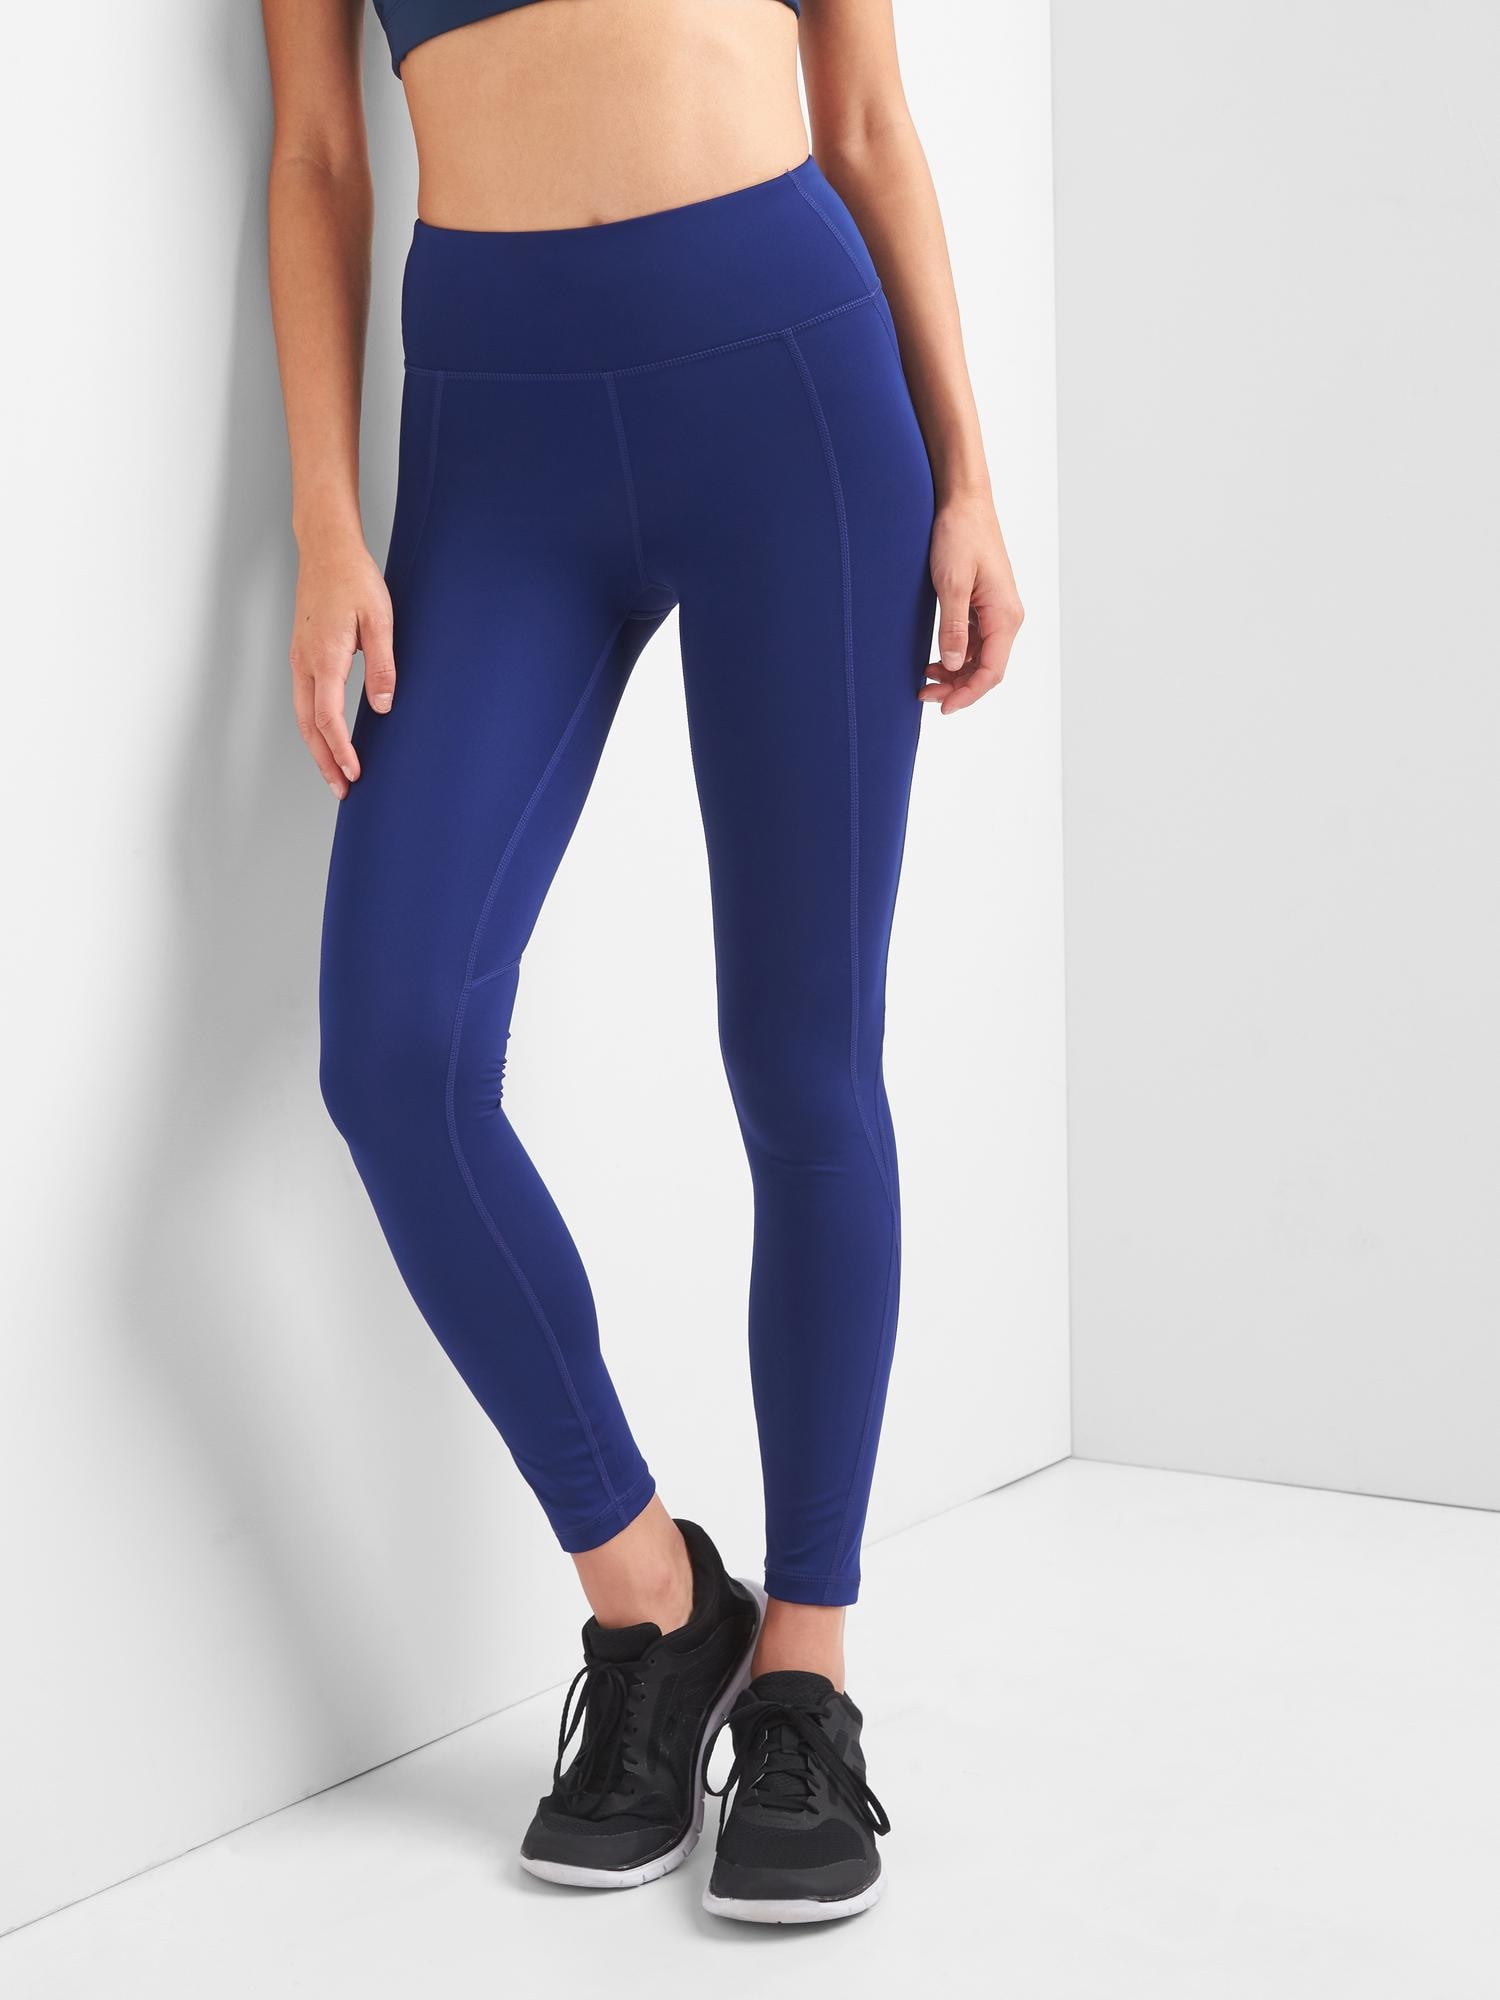 Fabletics - Leggings that flatter and sculpt at the same